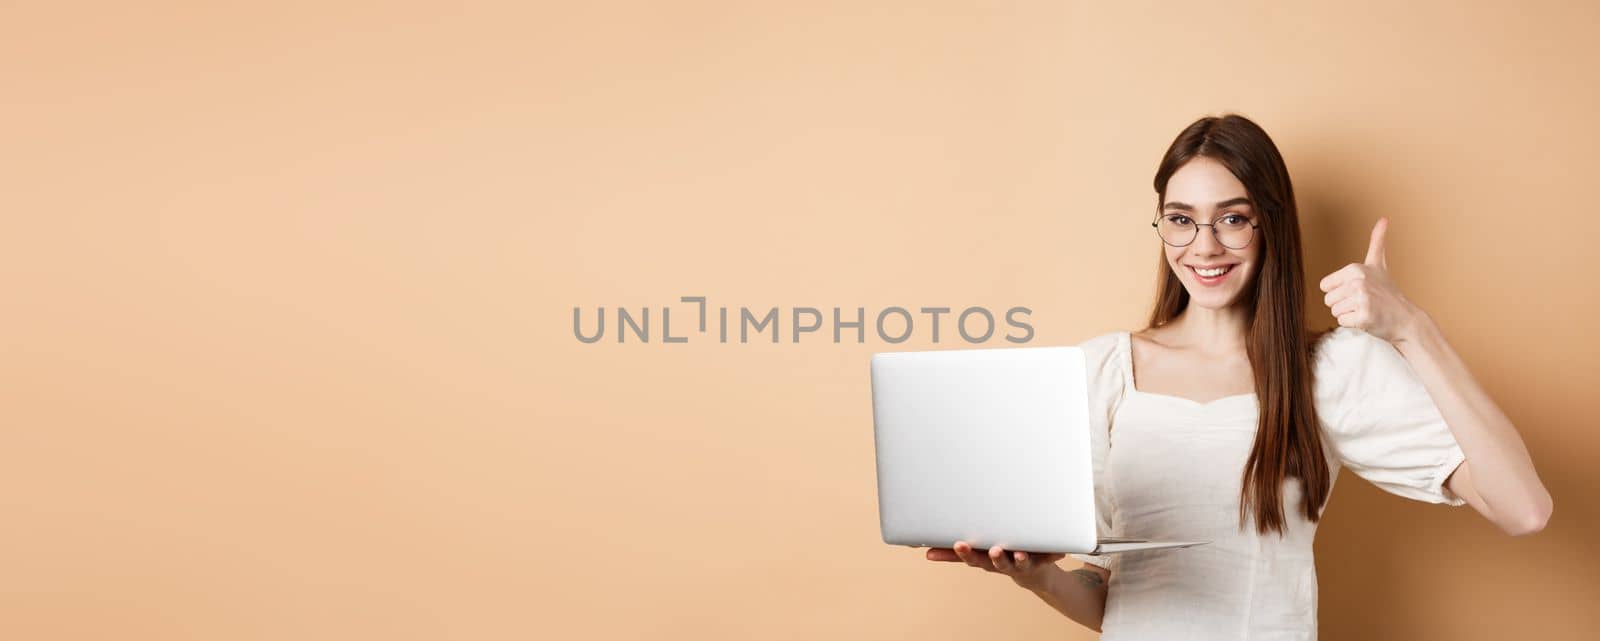 Smiling woman in glasses using laptop and showing thumb up, working on computer, standing on beige background.